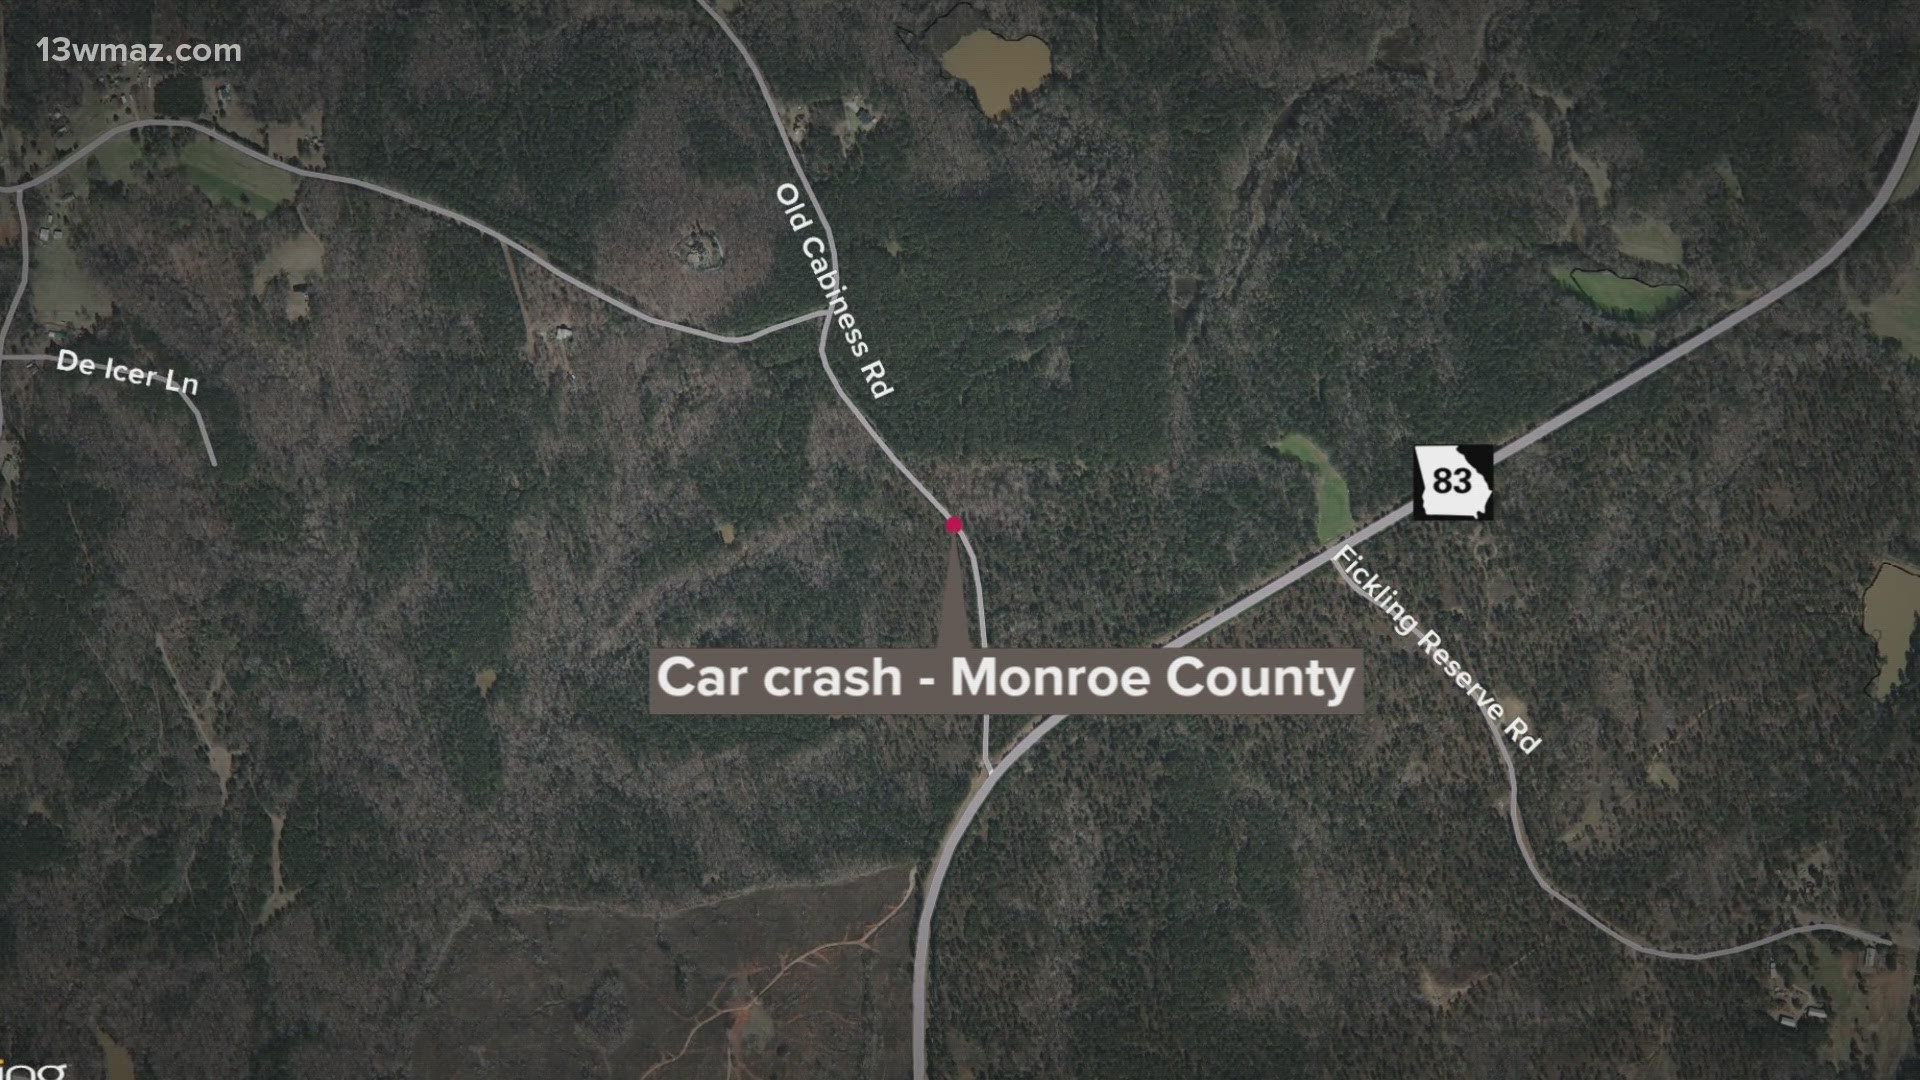 The crash happened near Old Cabiness Road and Highway 83 between an SUV and a semi-truck, the Monroe County Sheriff's Office said.